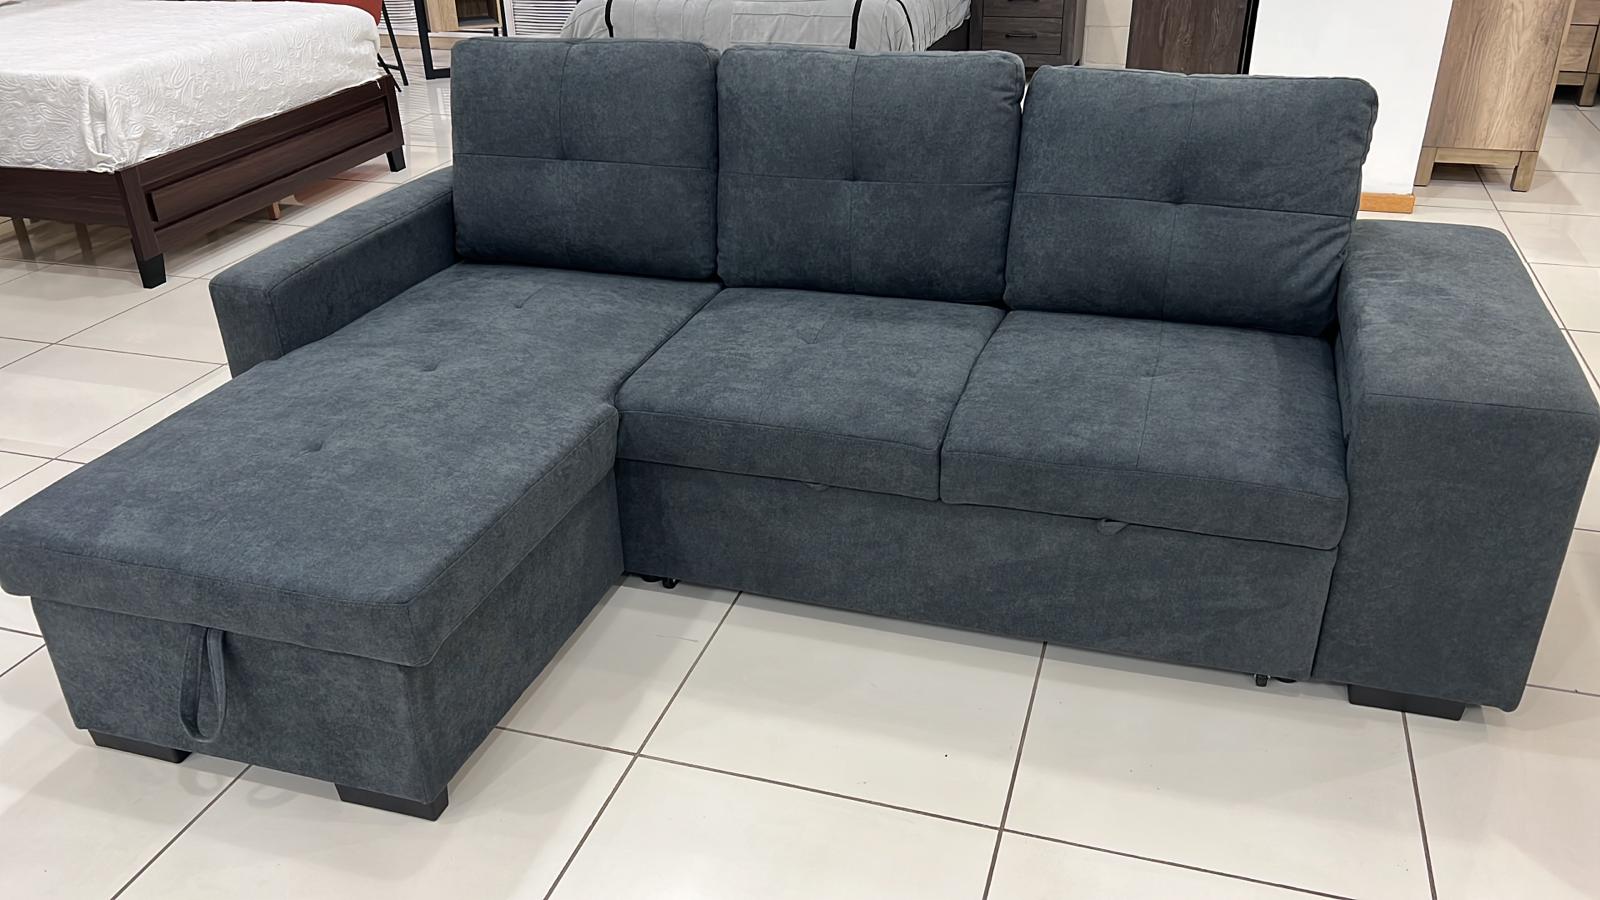 IBIZA - Sofa/Chaise w/Pullout Bed - 47048